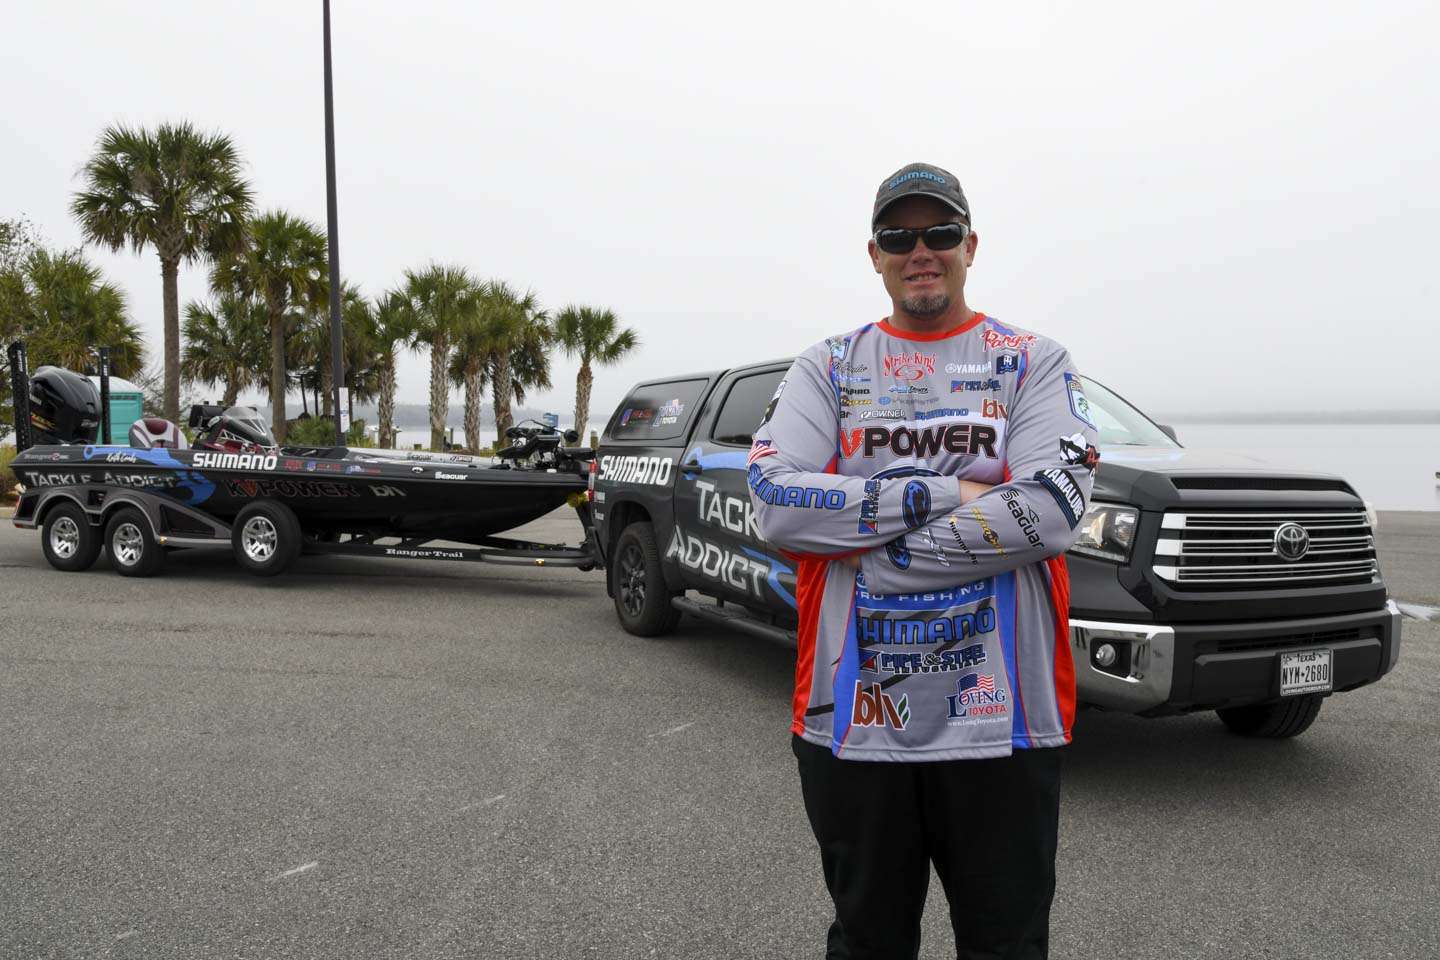 Bassmaster Elite Series pro Keith Combs will begin the 2021 Bassmaster Elite Series driving his fifth Toyota Tundra, a 2021 CrewMax. Toyota Bonus Bucks is the only program that pays anglers to fish. Qualifying owners earn tournament contingency bonus cash when they place highest in a tournament, and among other program participants.